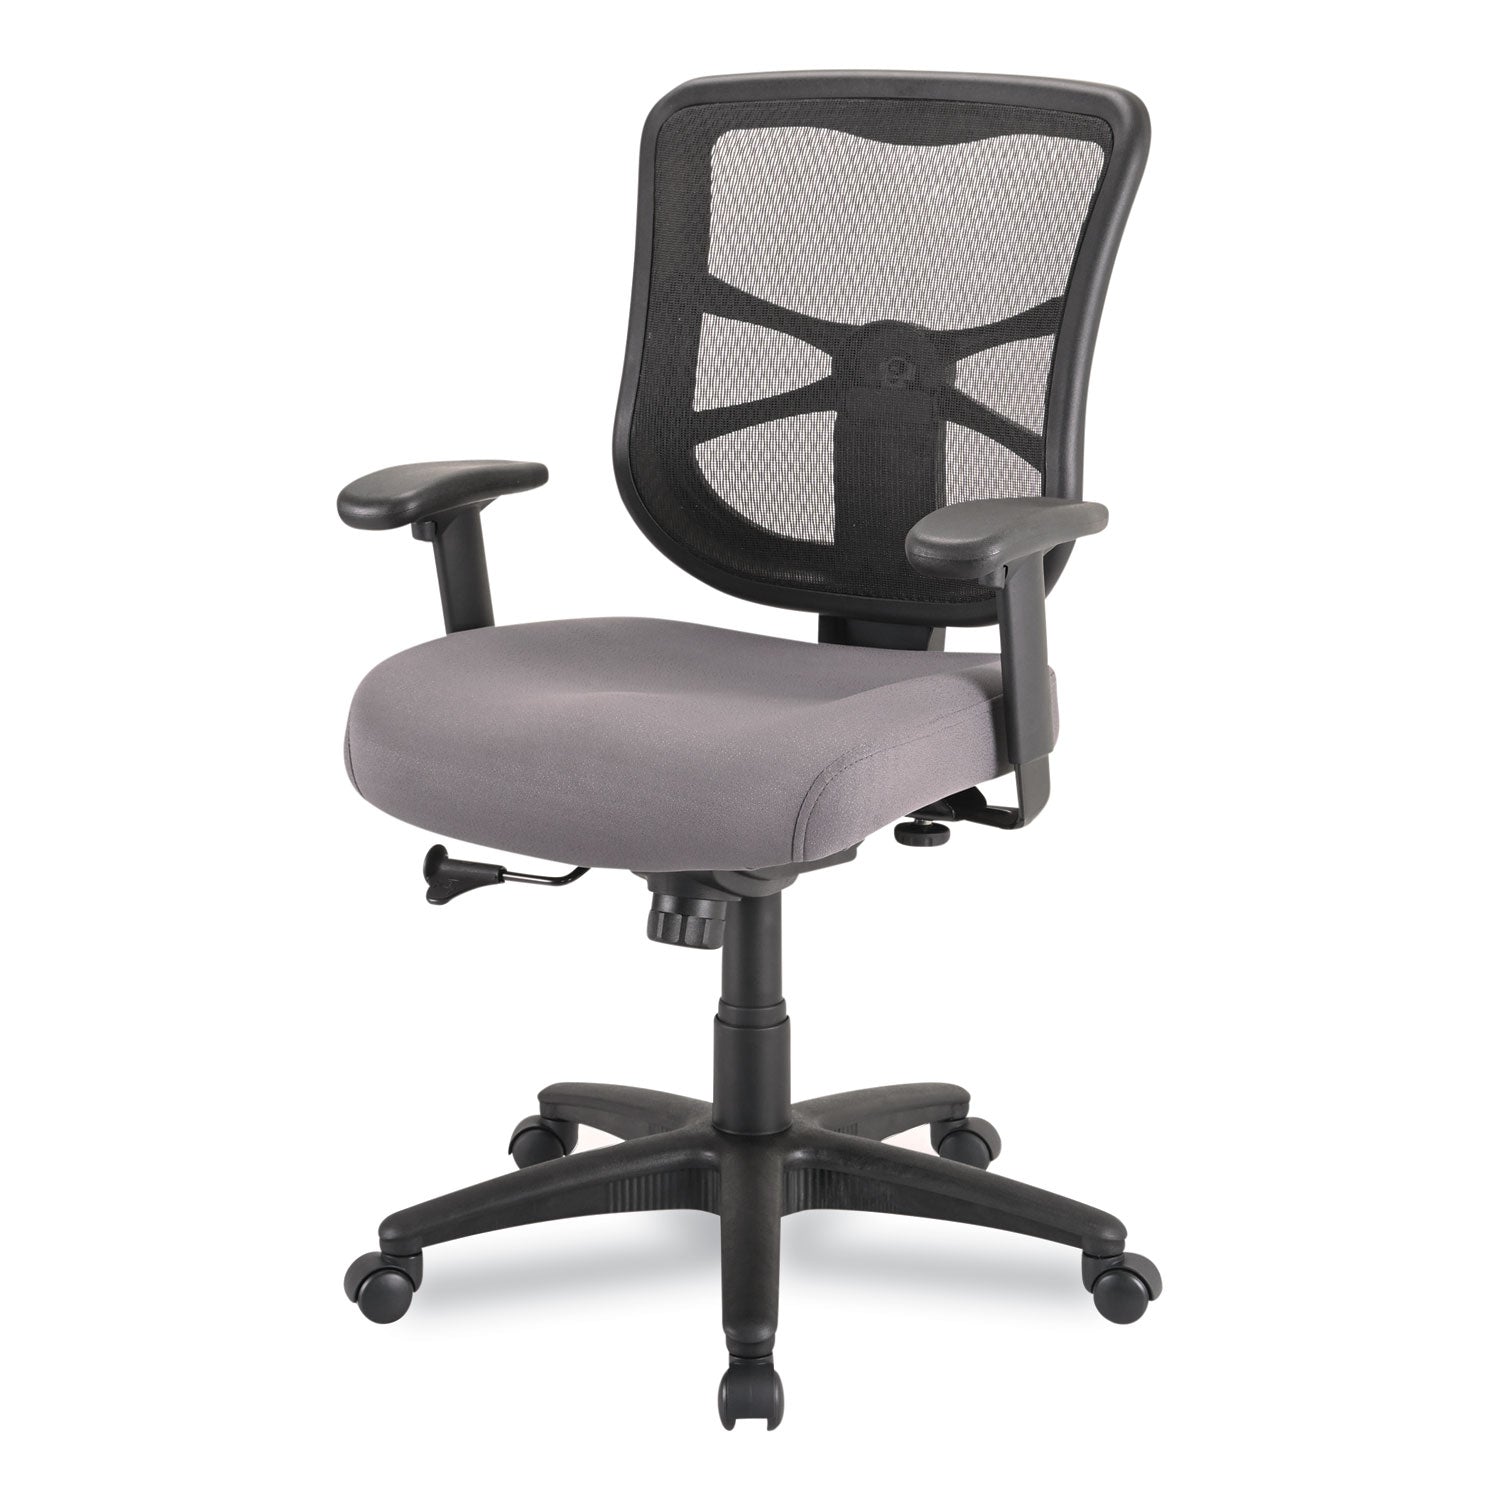 alera-elusion-series-mesh-mid-back-swivel-tilt-chair-supports-up-to-275-lb-179-to-218-seat-height-gray-seat_aleel42bme40b - 2